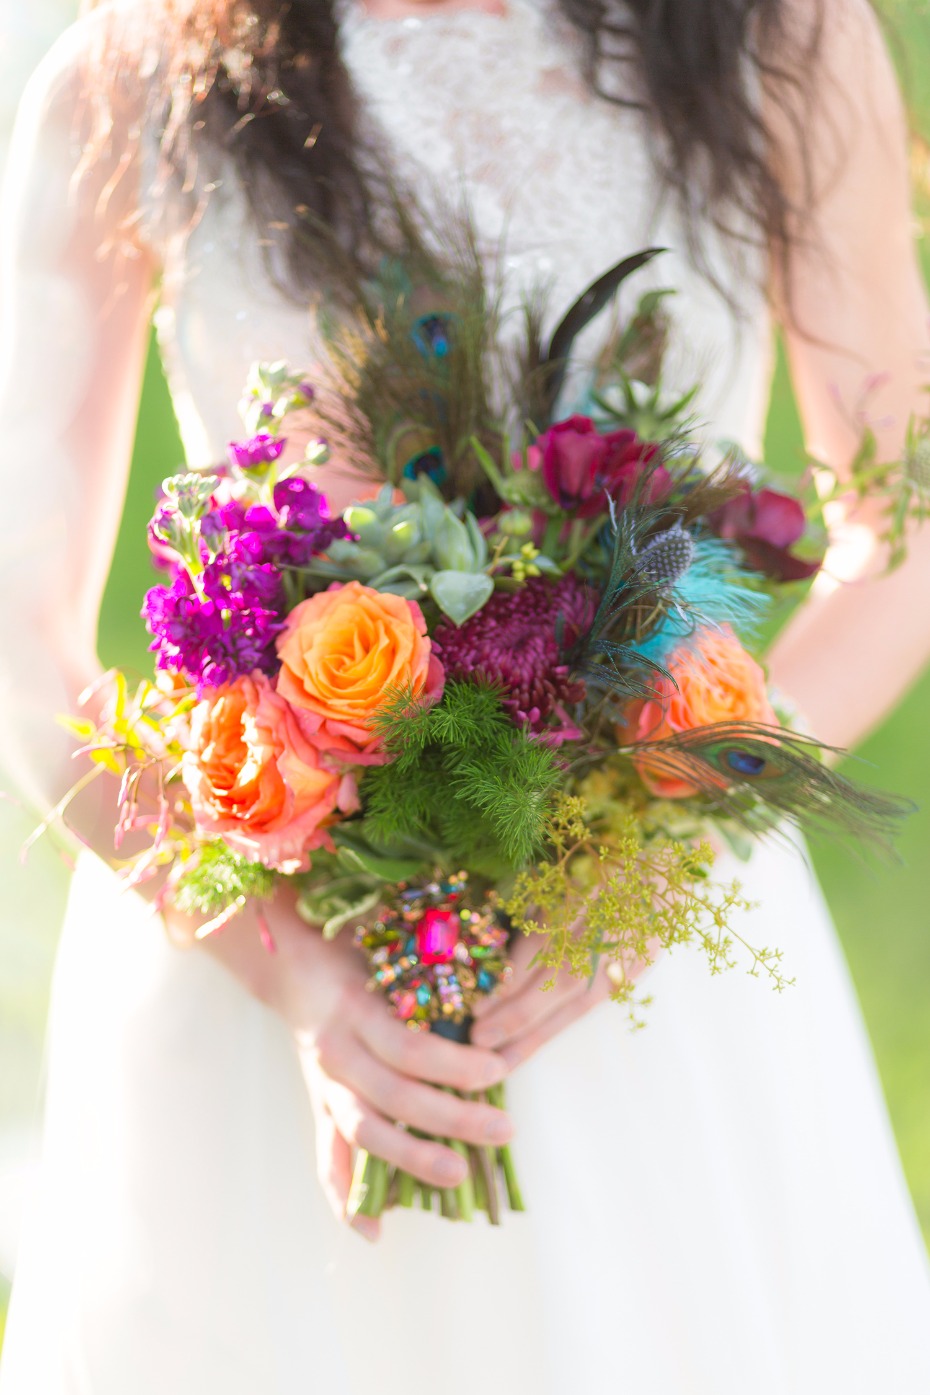 Jewel toned bouquet with peacock feathers